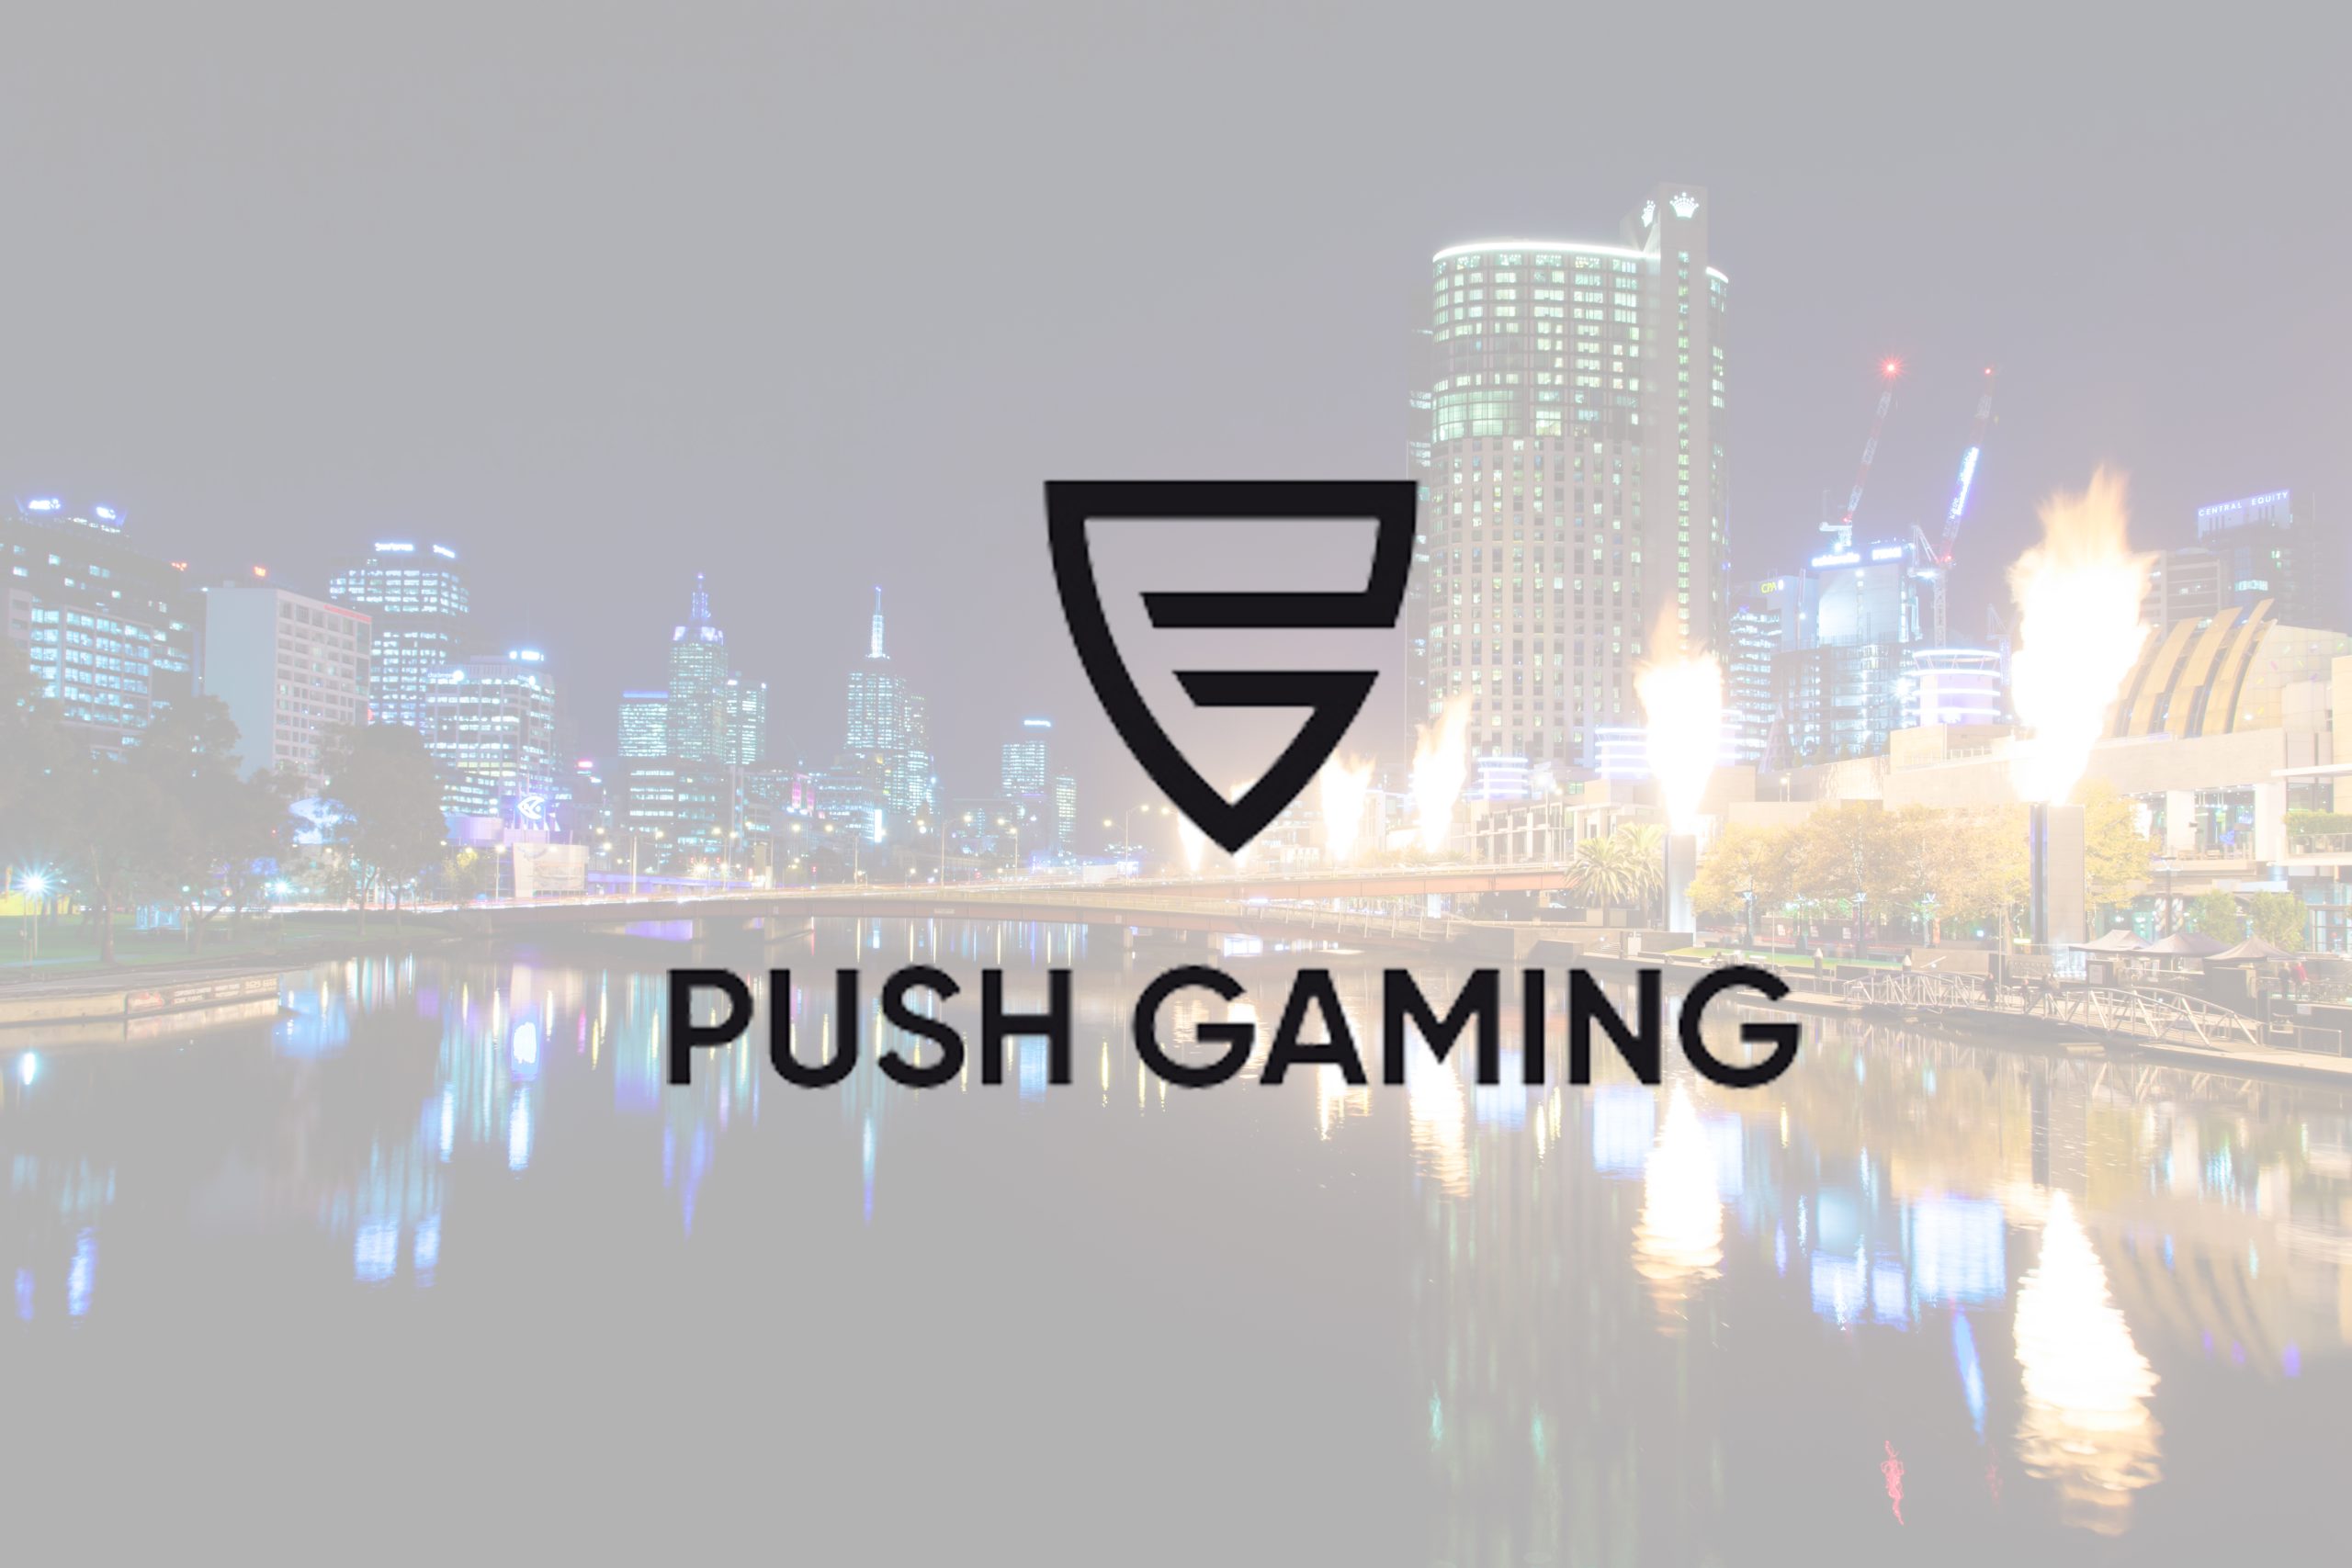 Review On Push Gaming Not On Gamstop